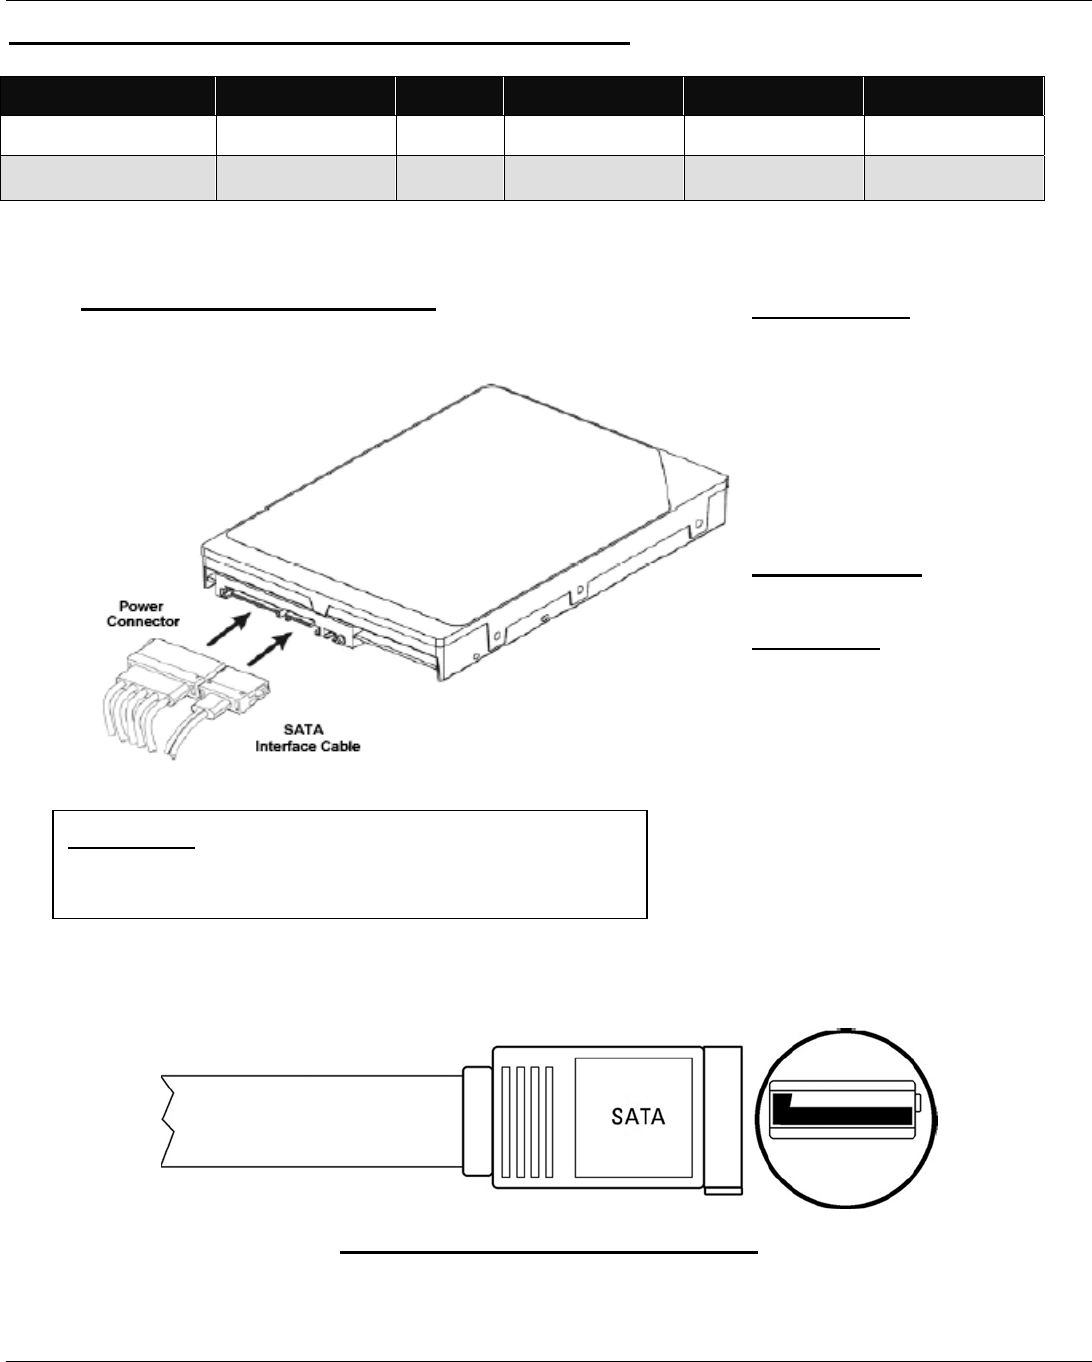 Instruction Manual For Zt-4 Driving Computer